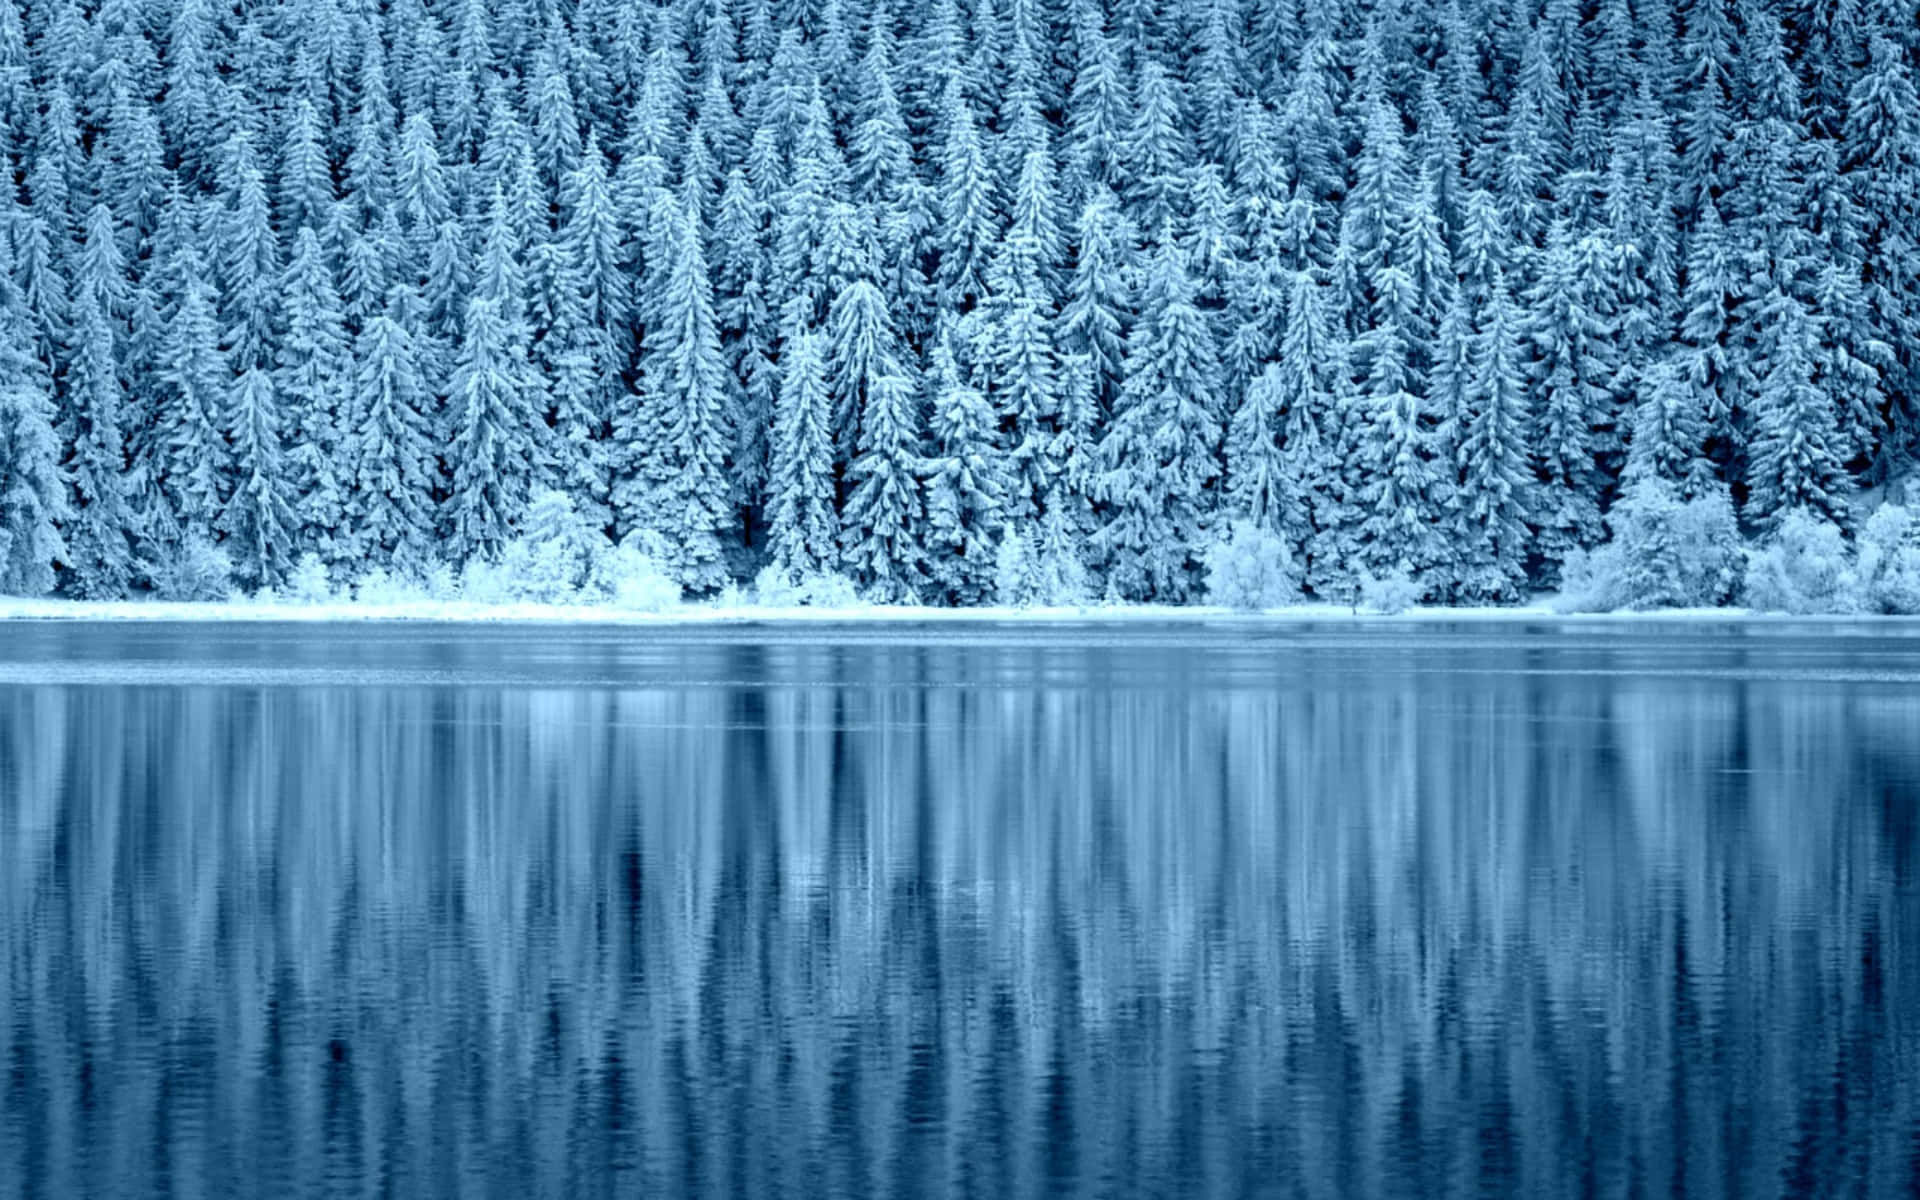 "Discover a peaceful snowy forest full of serenity and beauty."